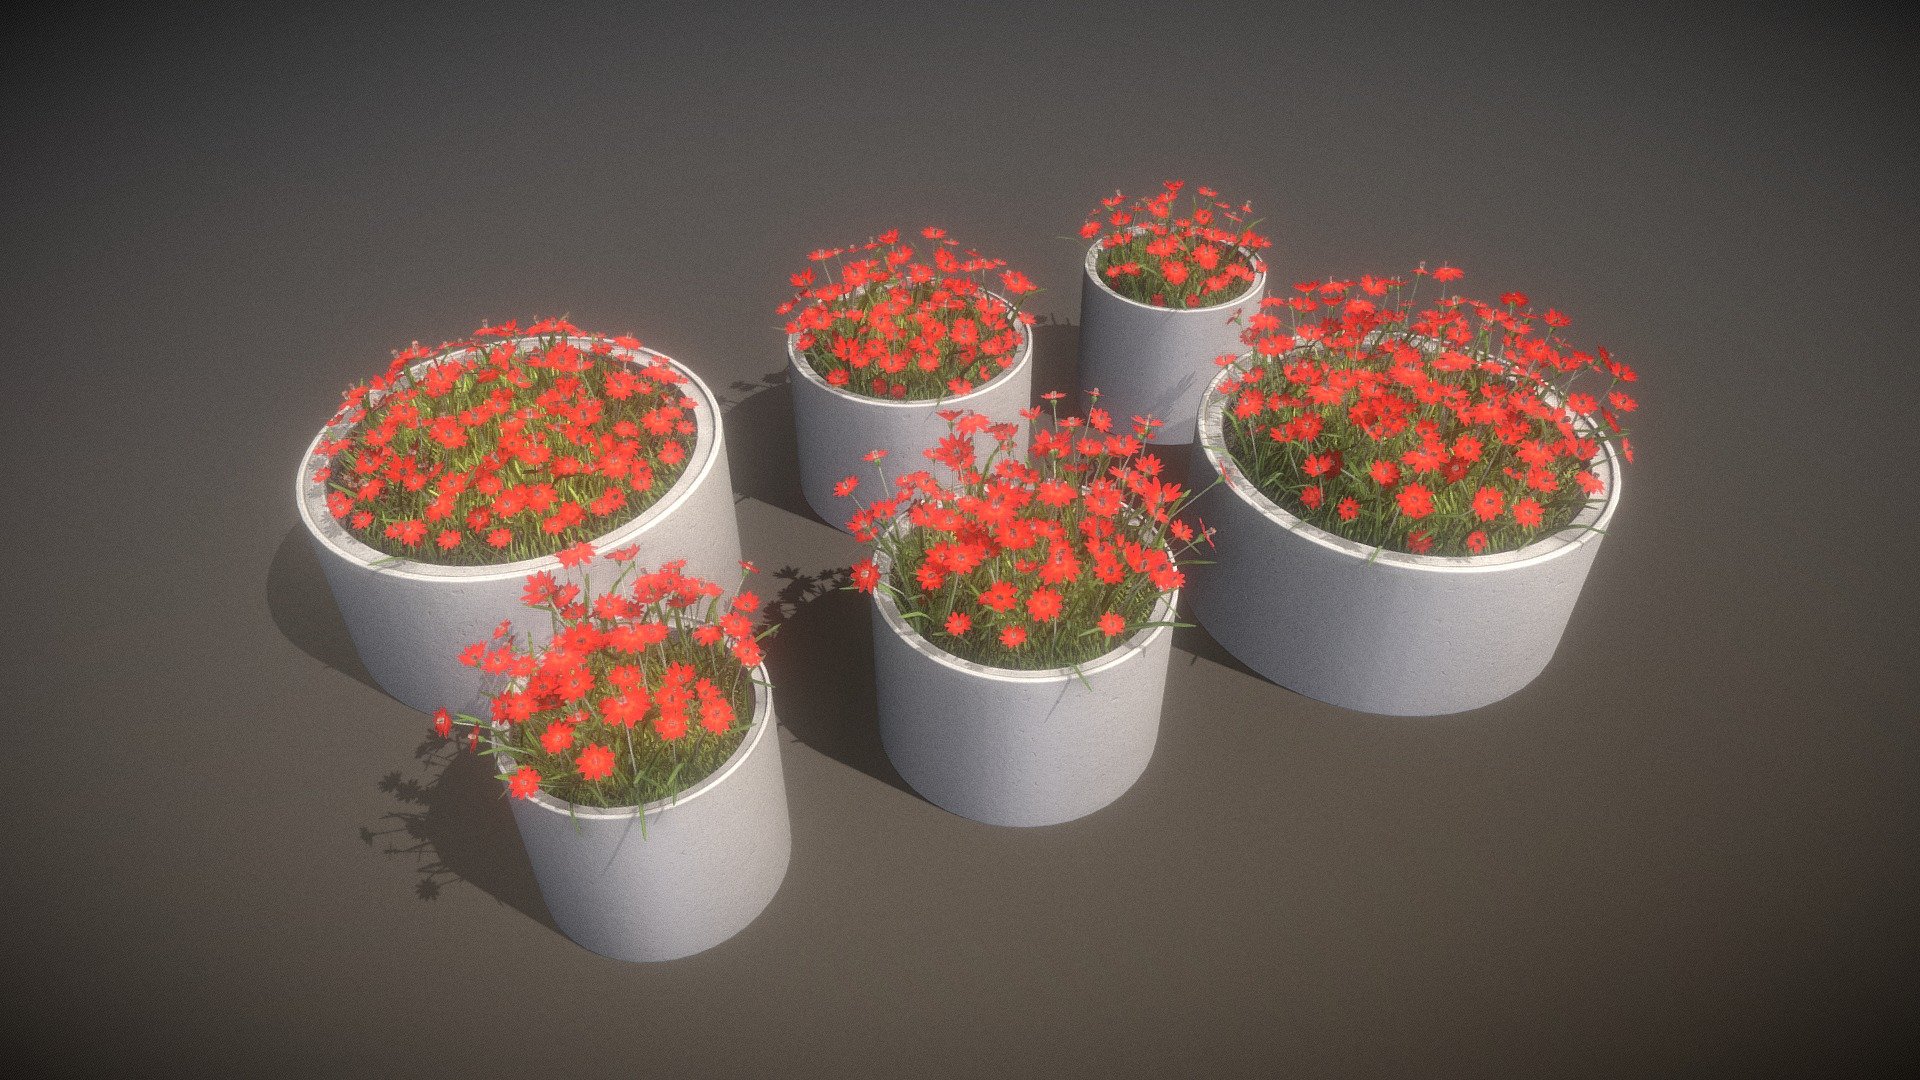 Here are some concrete pipe pots with red flowers.

Parts:

Object Name - Concrete_pot_800mm_Red_Flower_1 

Dimensions -  1.021m x 1.001m x 1.117m



Vertices = 4350


Polygons = 2444



Object Name - Concrete_pot_800mm_Red_Flower_2 

Dimensions -  0.964m x 1.011m x 0.980m



Vertices = 2883


Polygons = 1846



Object Name - Concrete_pot_1000mm_Red_Flower_1 

Dimensions -  1.279m x 1.177m x 1.163m



Vertices = 5475


Edges = 7580
Polygons = 2894



Object Name - Concrete_pot_1000mm_Red_Flower_2 

Dimensions -  1.118m x 1.131m x 1.008m



Vertices = 3803


Polygons = 2240



Object Name - Concrete_pot_1500mm_Red_Flower_1 

Dimensions -  1.621m x 1.609m x 1.163m



Vertices = 8721


Polygons = 4217



Object Name - Concrete_pot_1500mm_Red_Flower_2 

Dimensions -  1.500m x 1.500m x 1.008m



Vertices = 5592


Polygons = 2970


Modeled and textured by 3DHaupt in Blender-2.91 - Concrete Pipe Pots With Red Flowers - Buy Royalty Free 3D model by VIS-All-3D (@VIS-All) 3d model